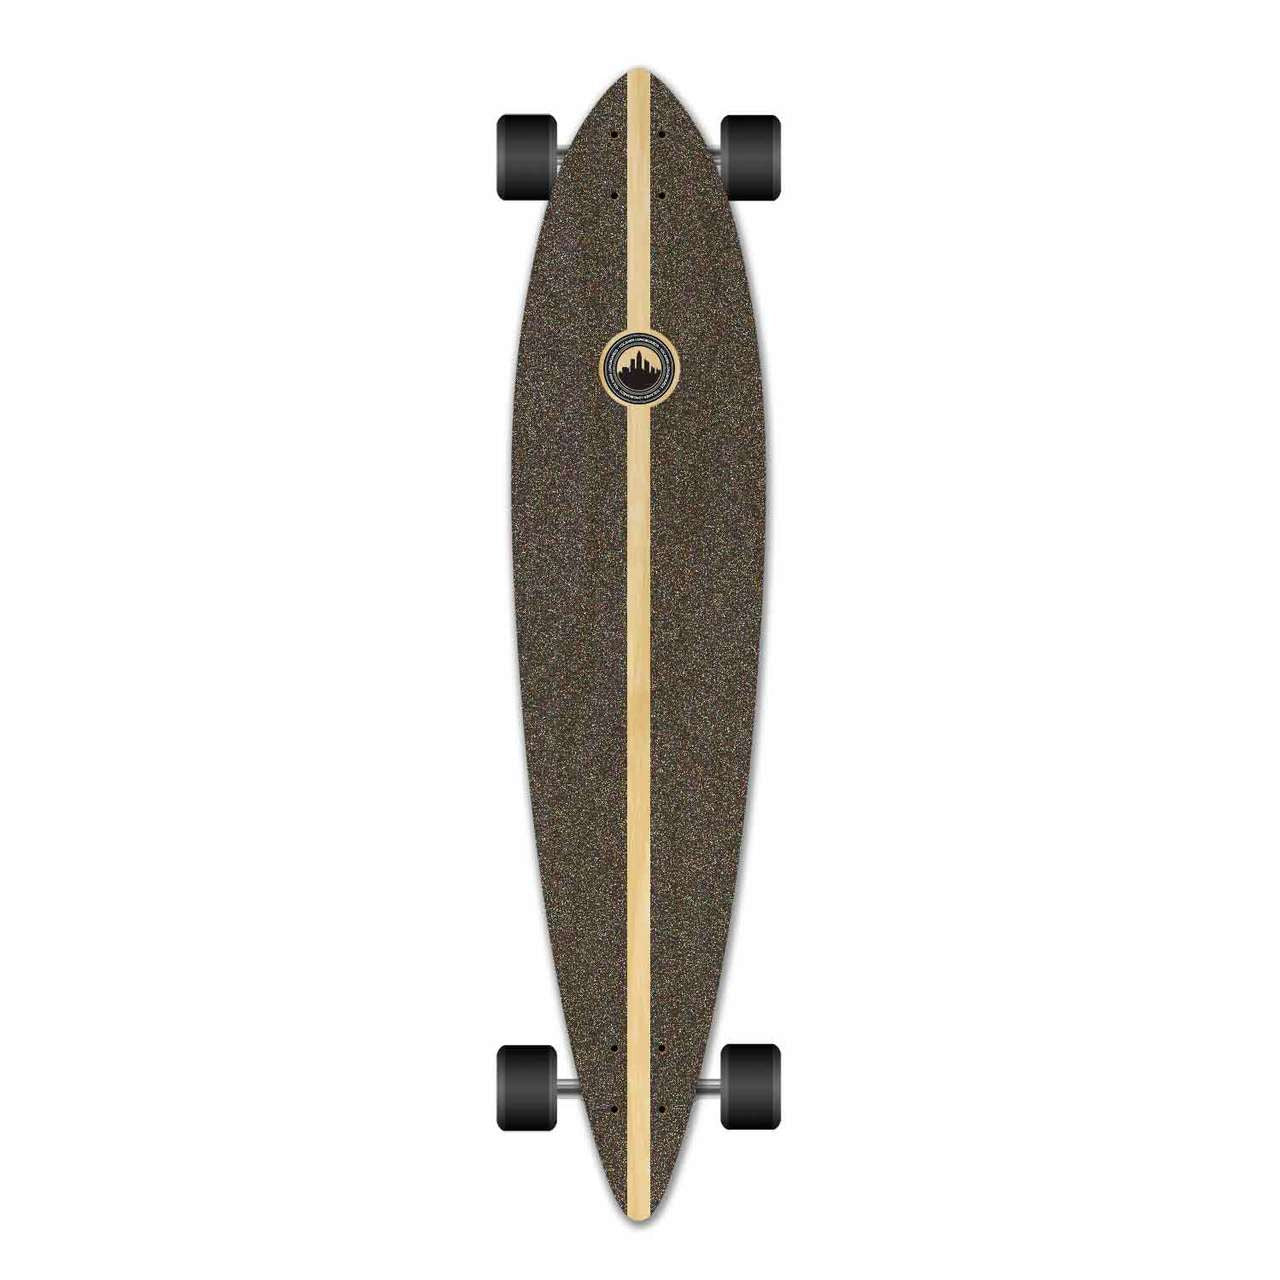 Yocaher Pintail Longboard Complete - New York